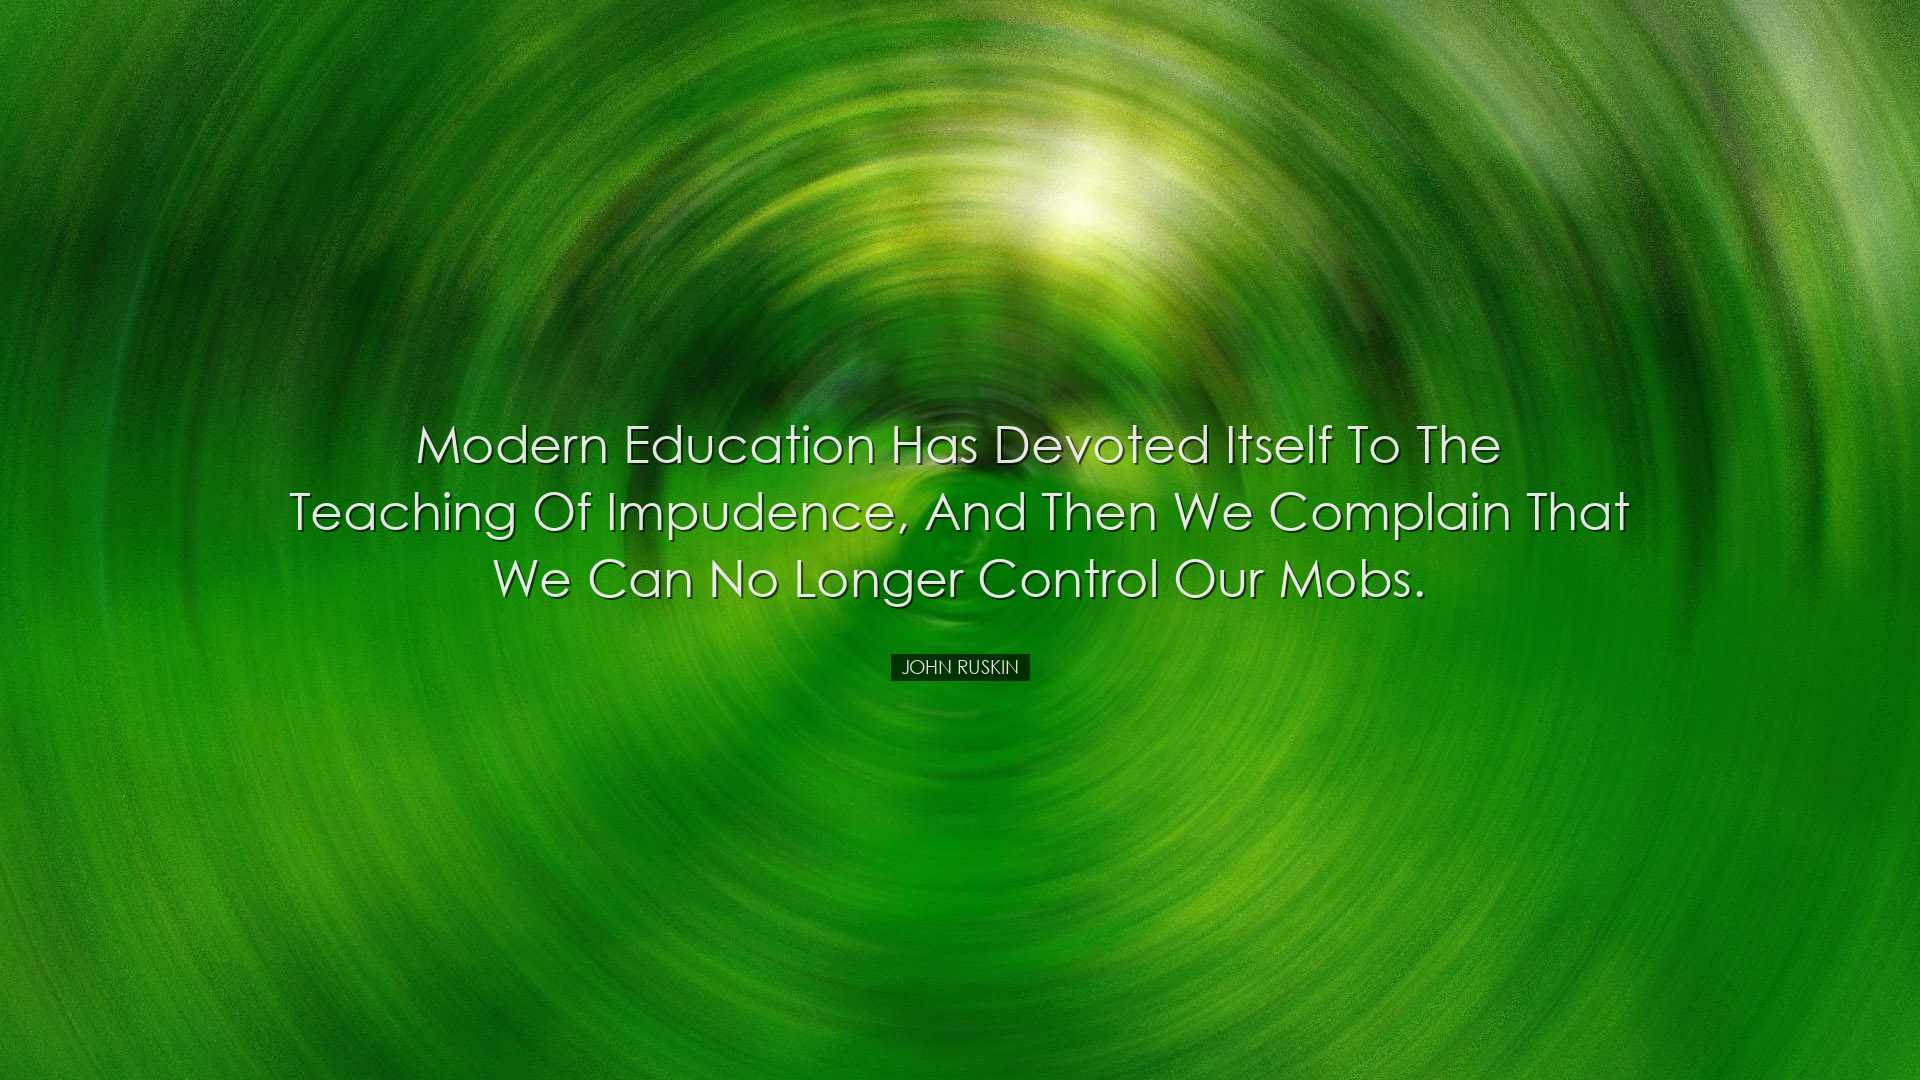 Modern education has devoted itself to the teaching of impudence,